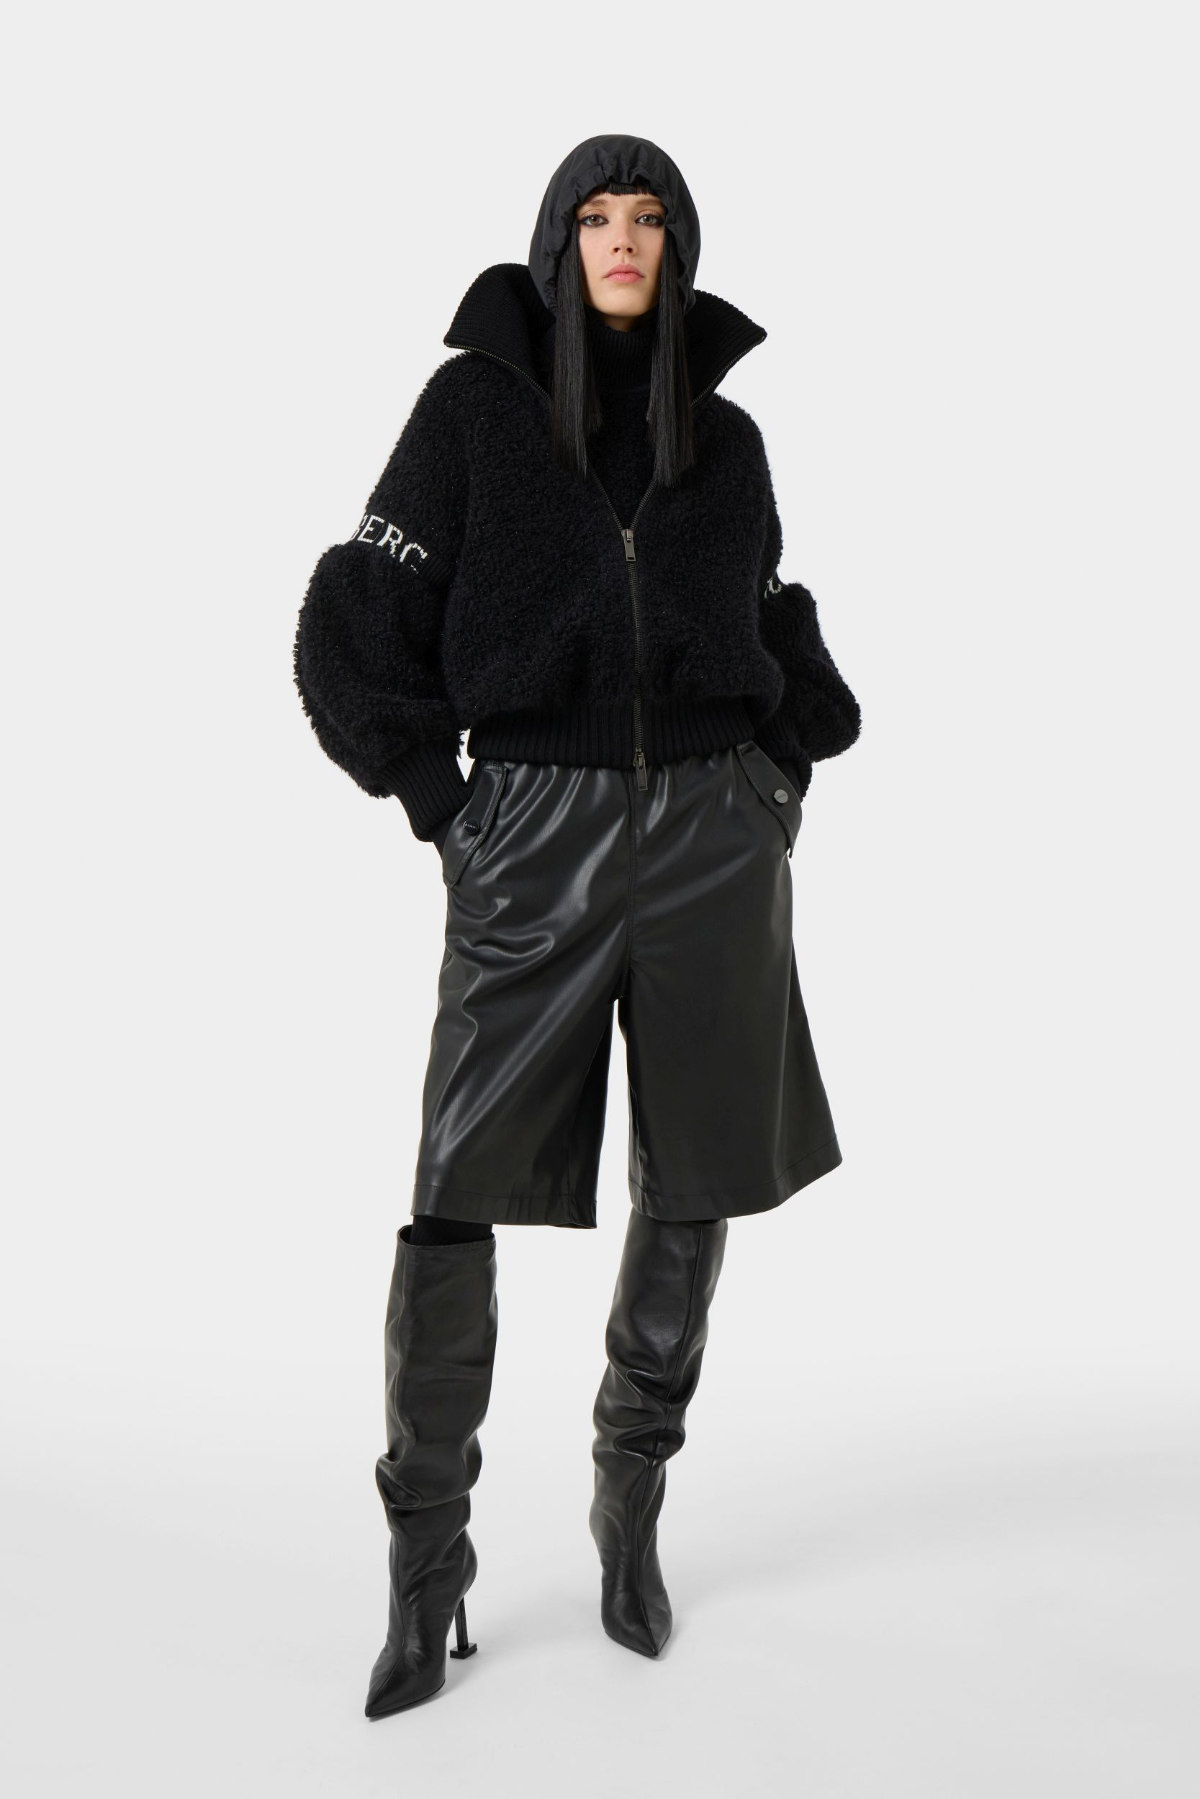 BACK IN BLACK With ICEBERG's Autumn-Winter 2022 Show Collection